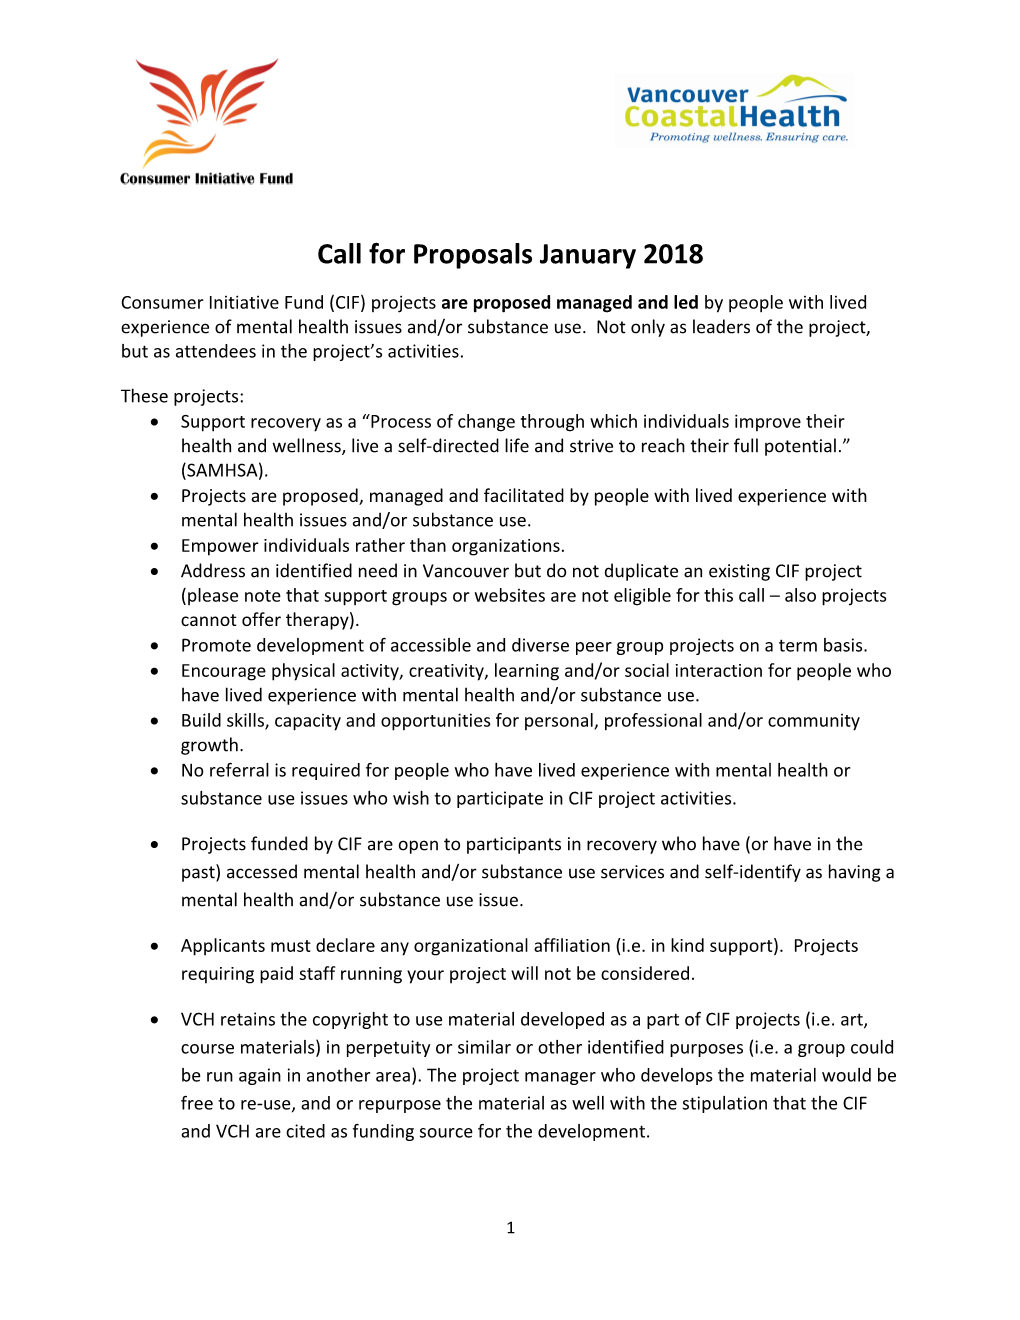 Call for Proposals January 2018